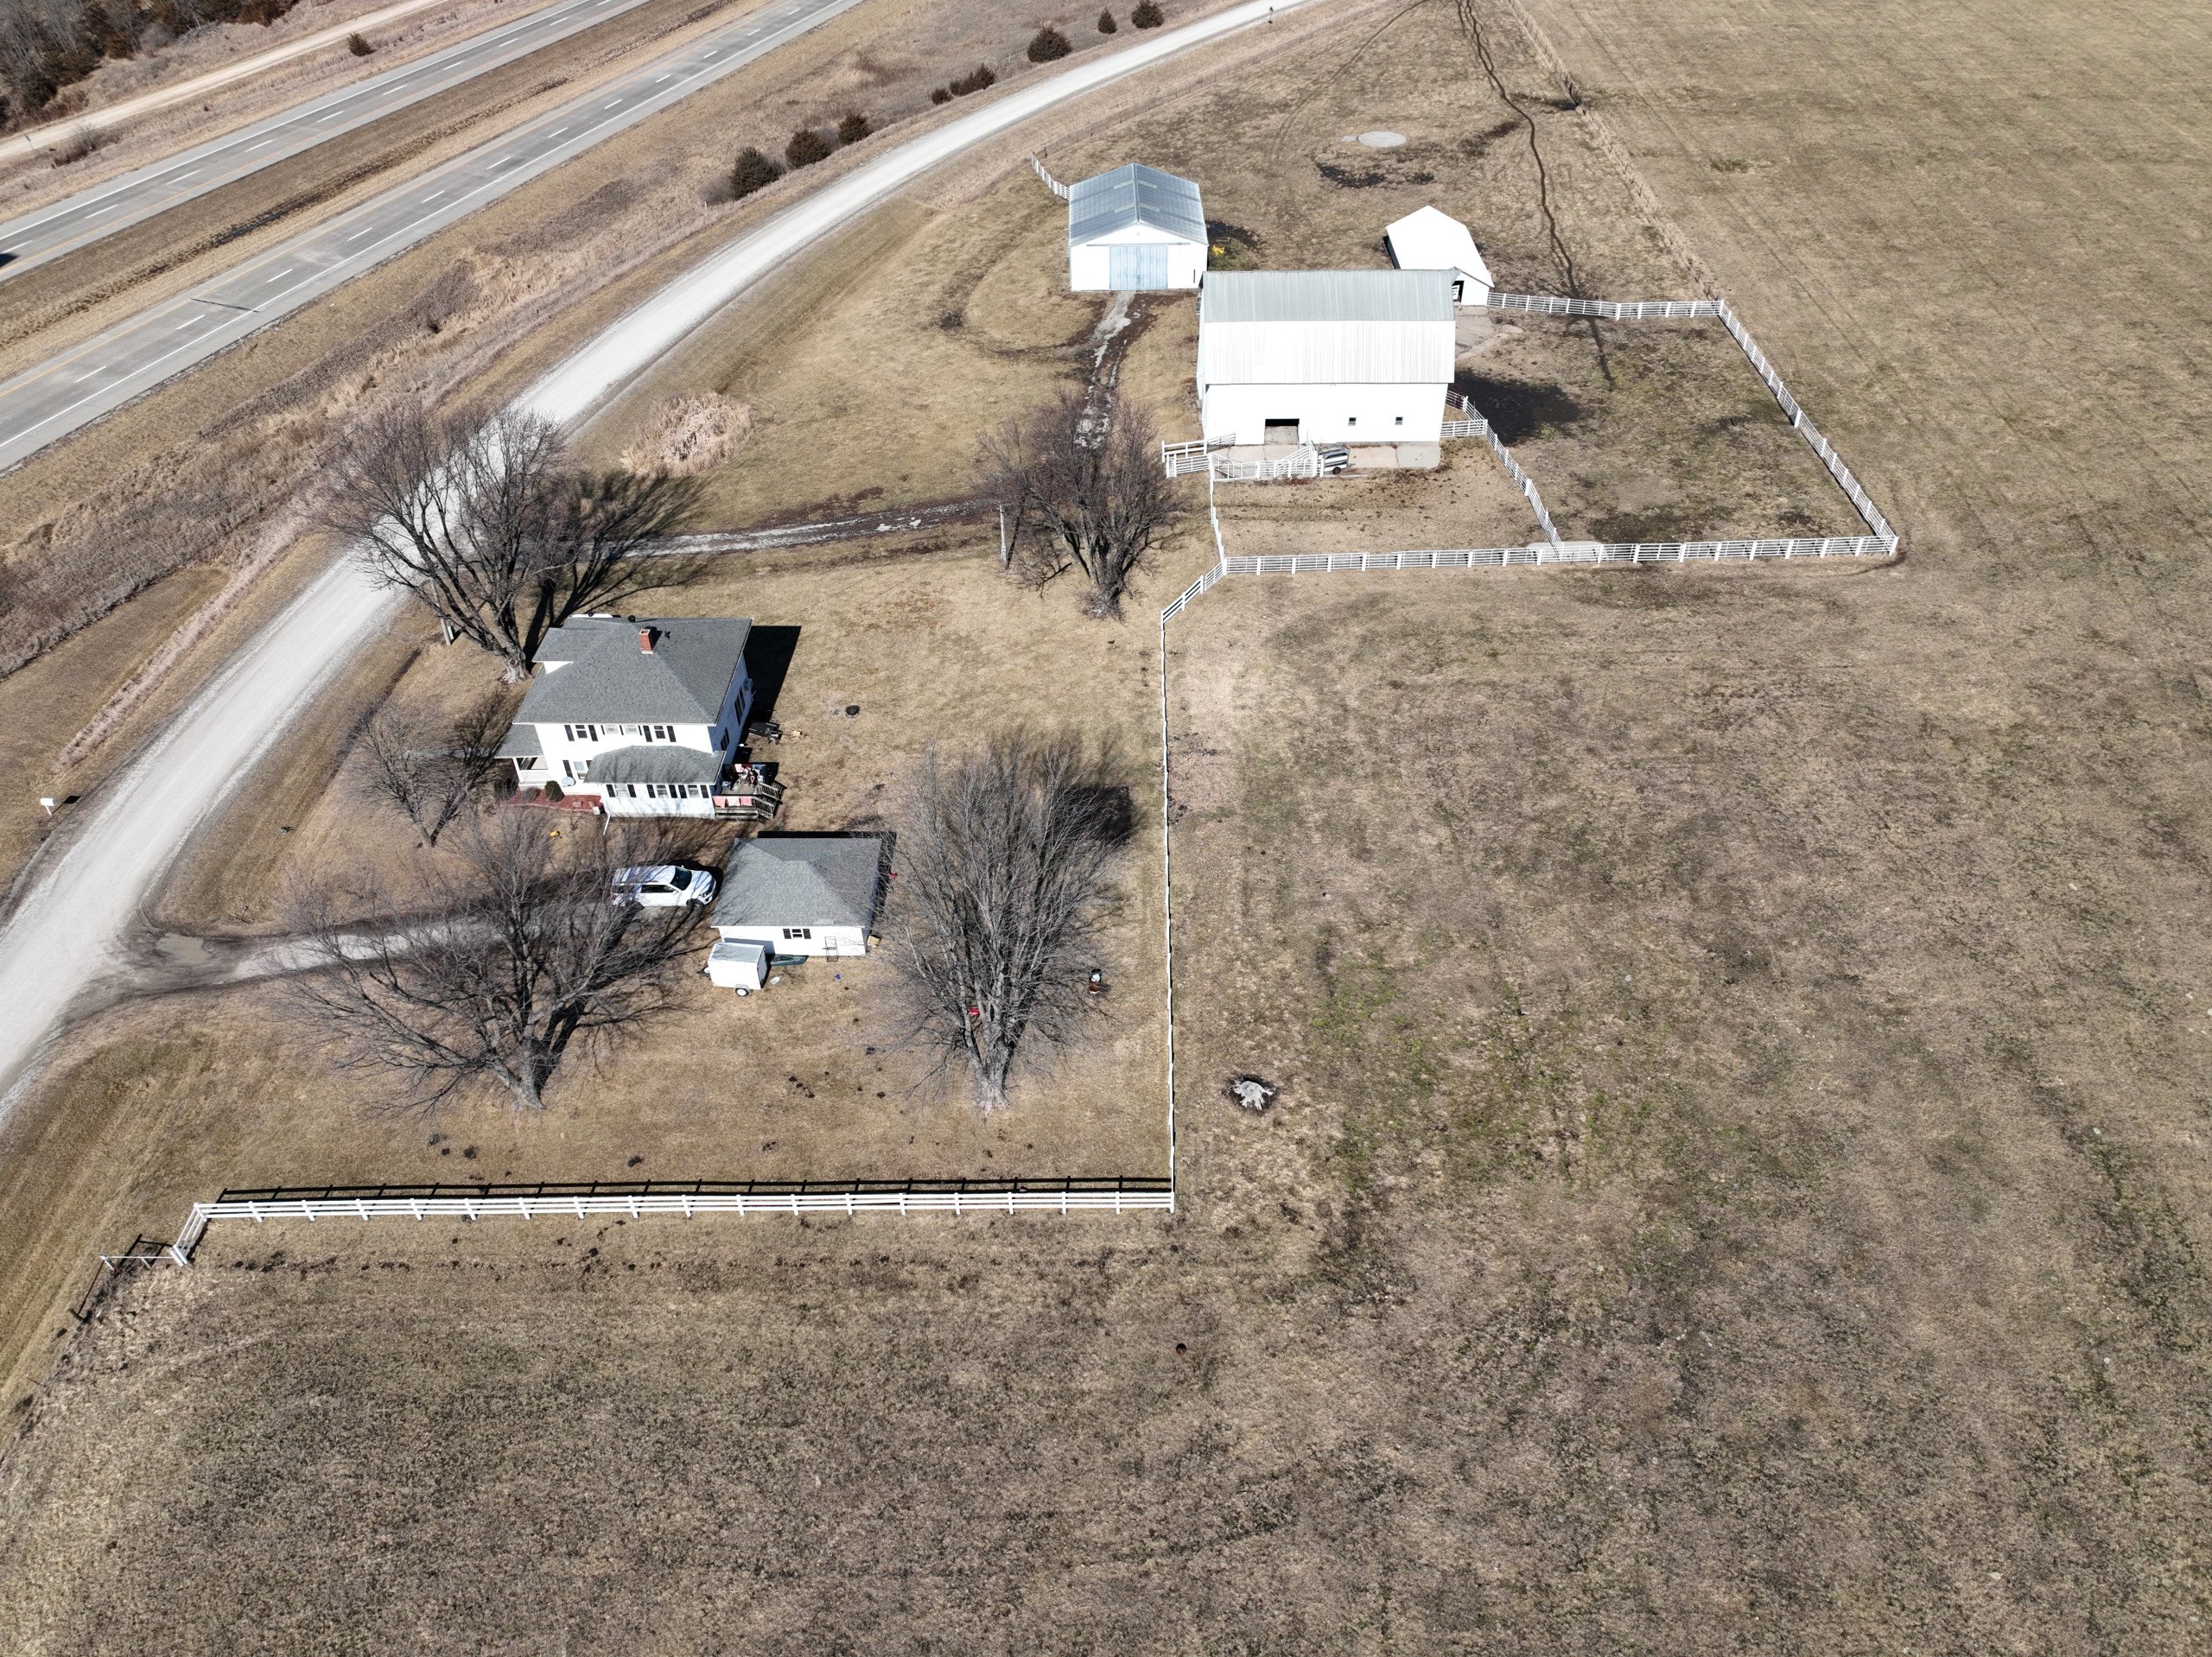 residential-decatur-county-iowa-20-acres-listing-number-16662-DJI_0070-2.jpg